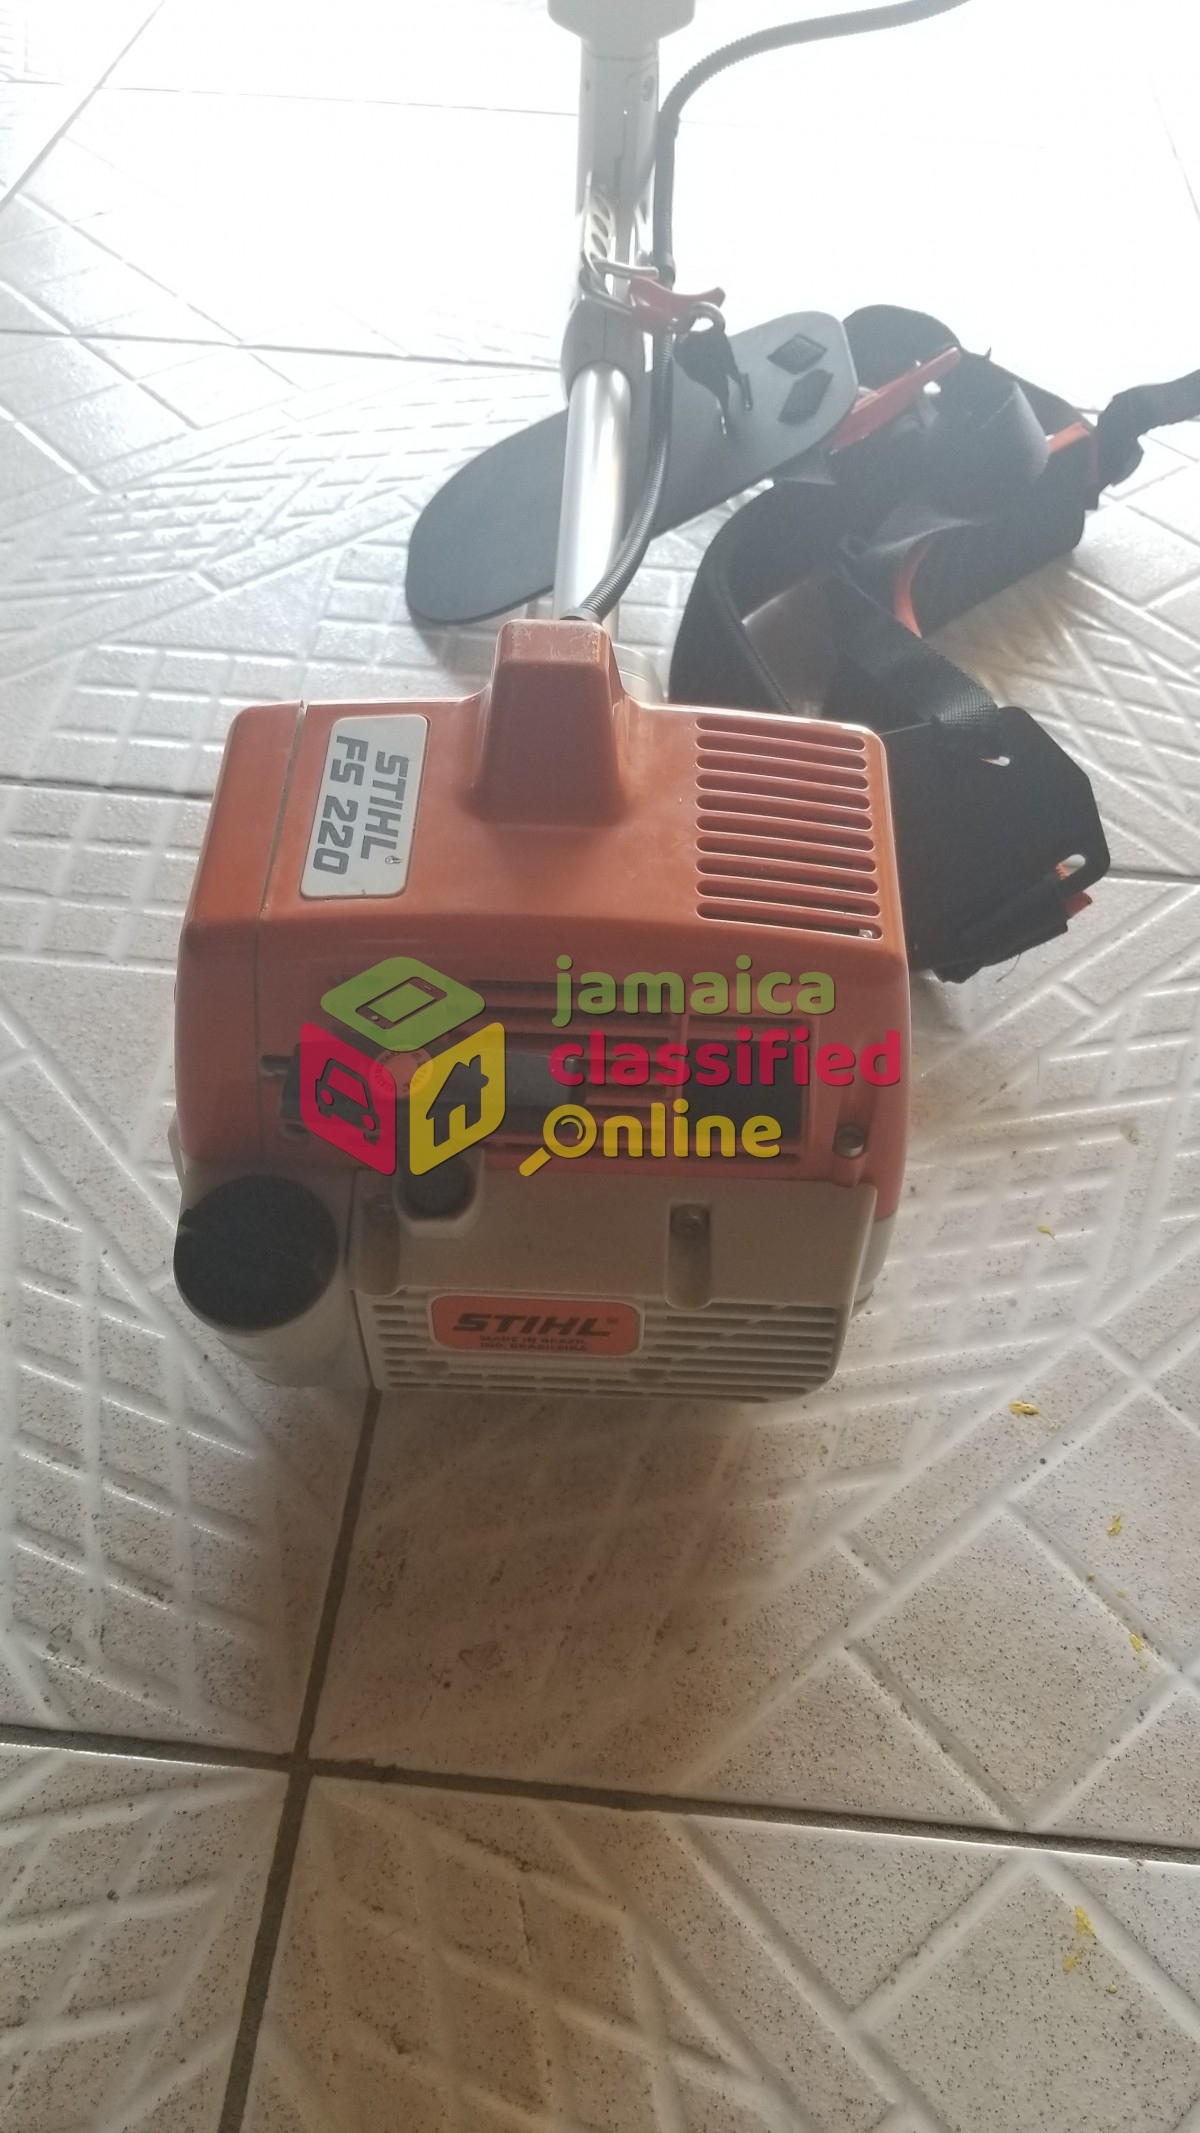 stihl weed wacker for sale